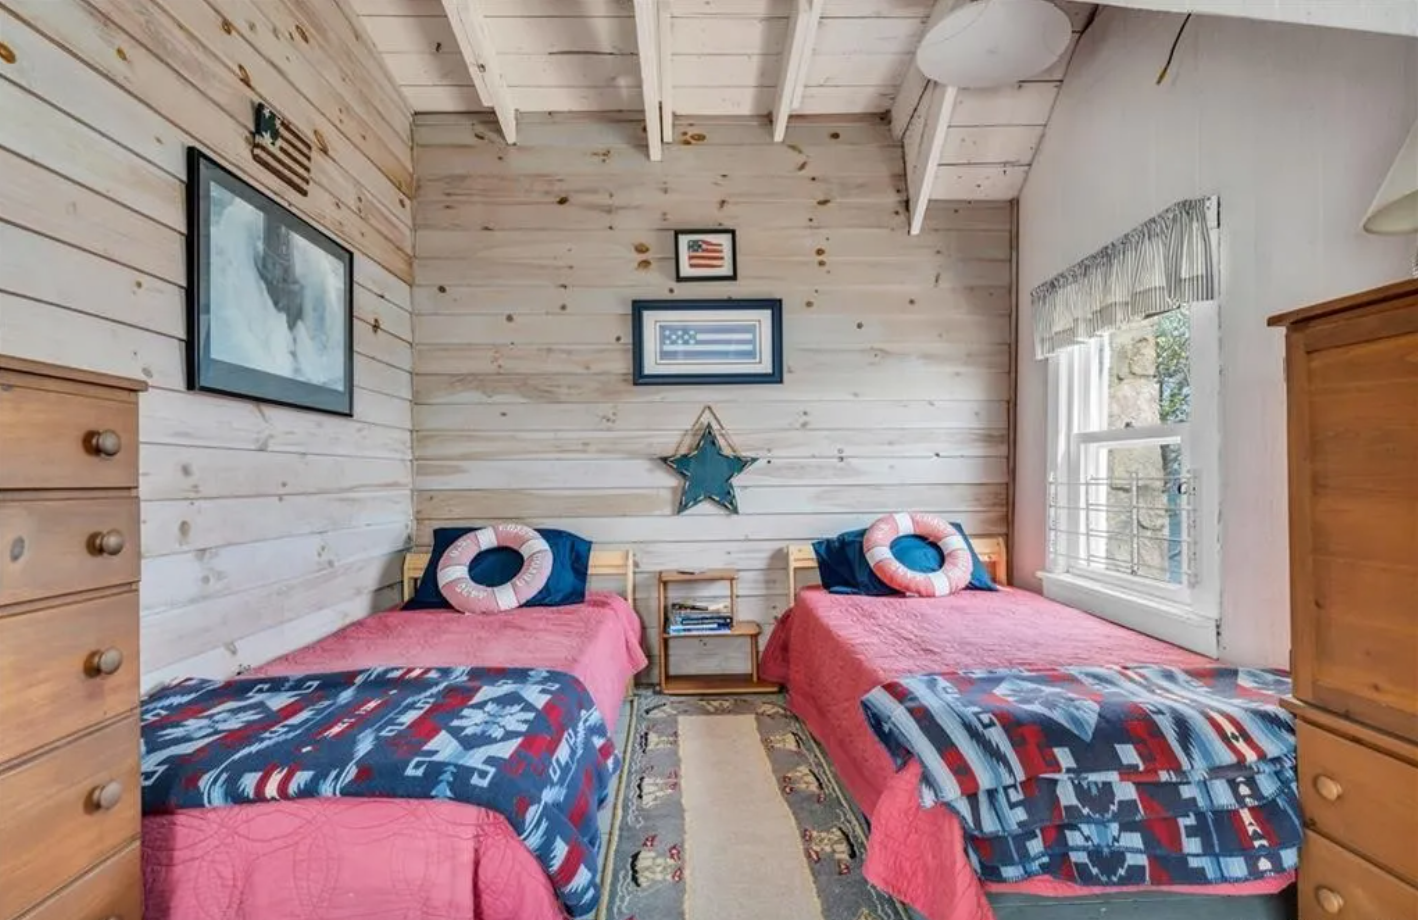 Bedroom with two twin beds, shiplap walls, and single-hung window.